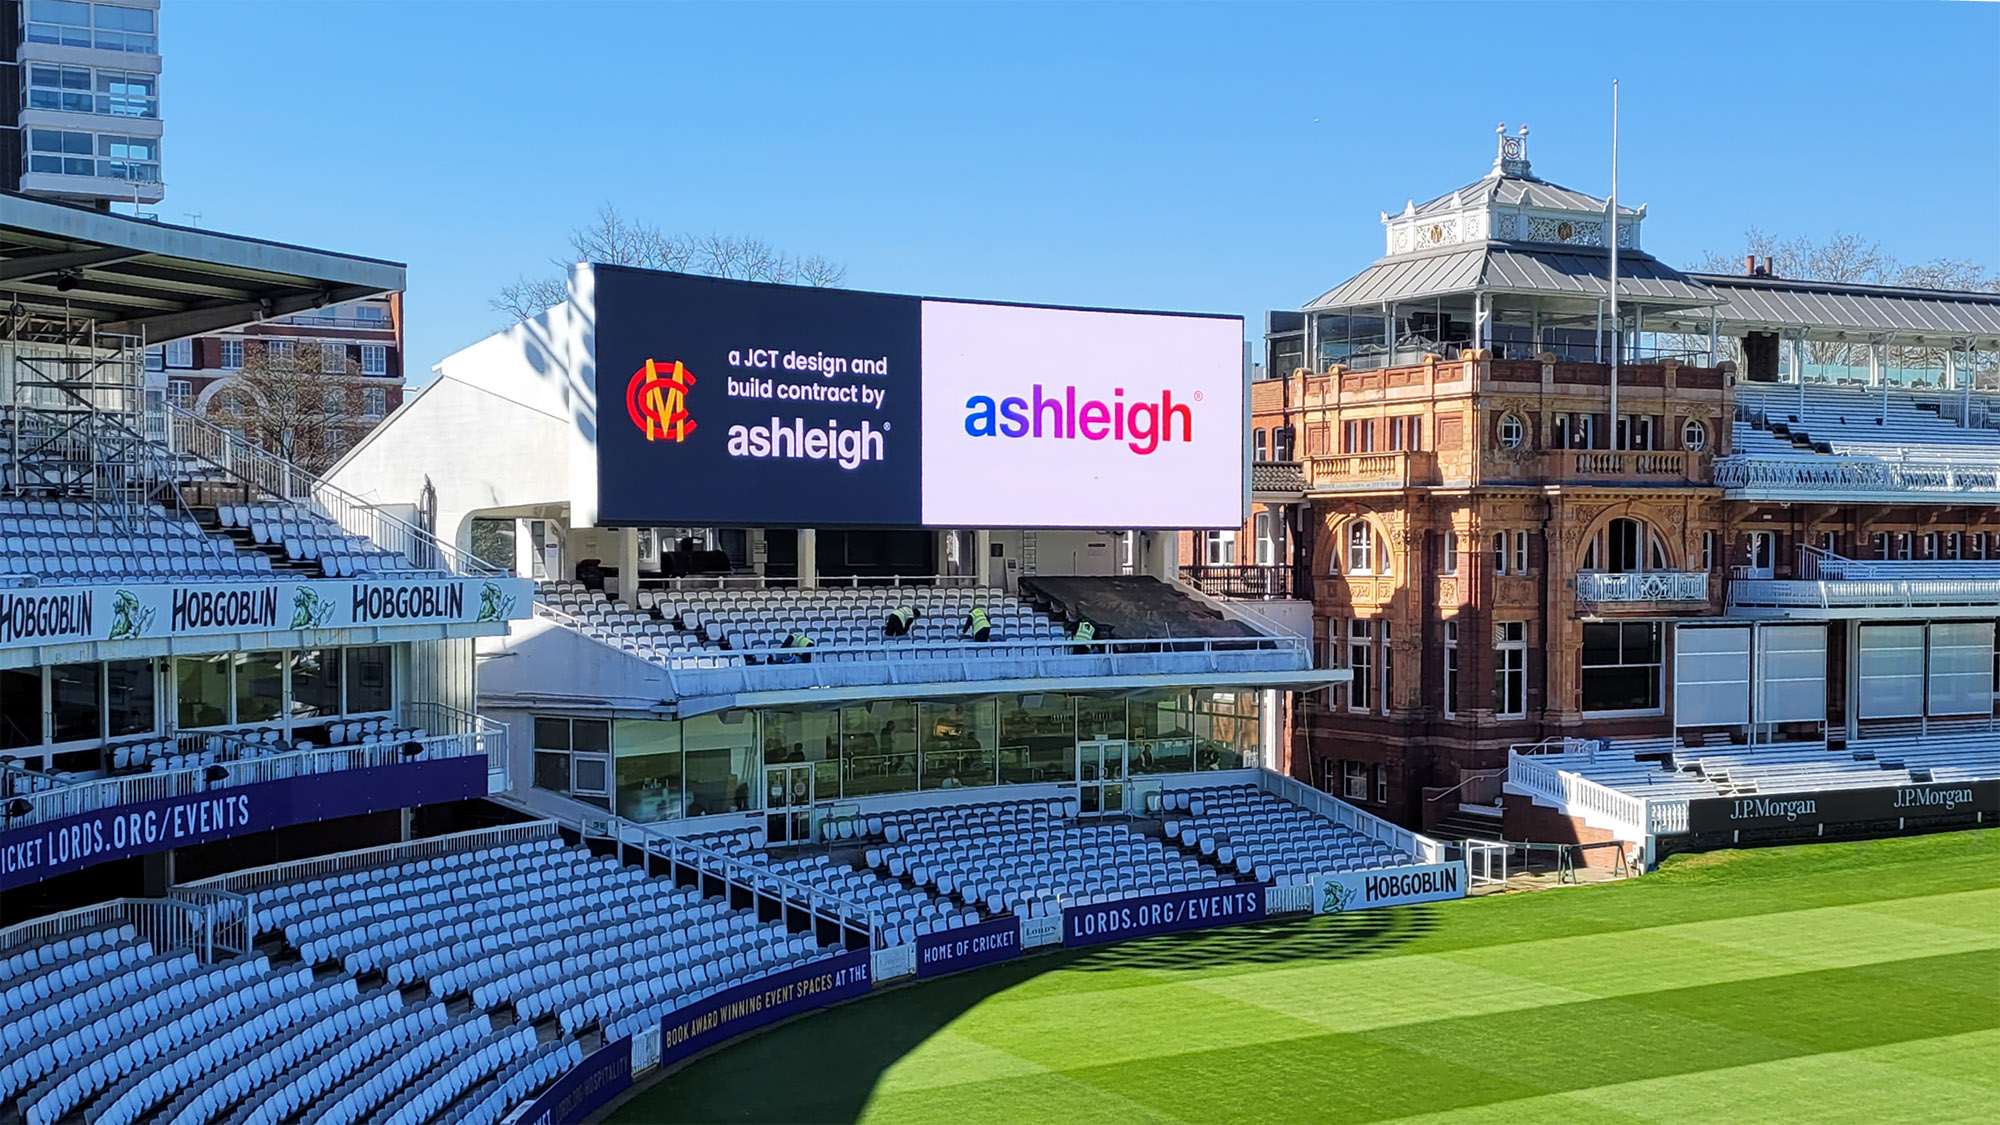 Ashleigh logo displayed on the Lord's cricket grounds